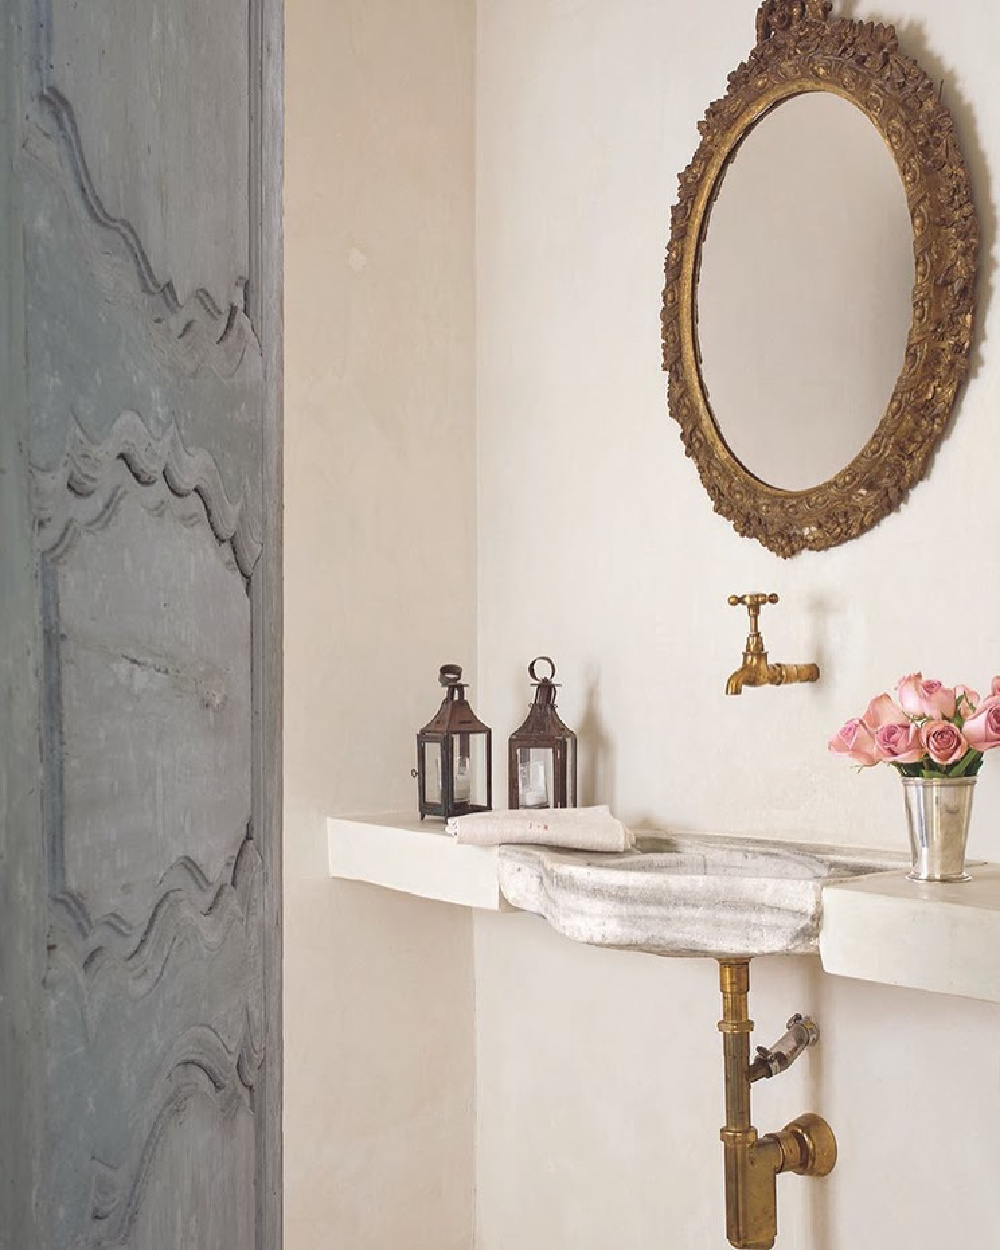 Luxurious and elegant powder room with blue antique doors, gilt mirror, and stone sink in Houston home with interior design by Pamela Pierce. Come enjoy photos of this house tour with architecture by Reagan Andre.